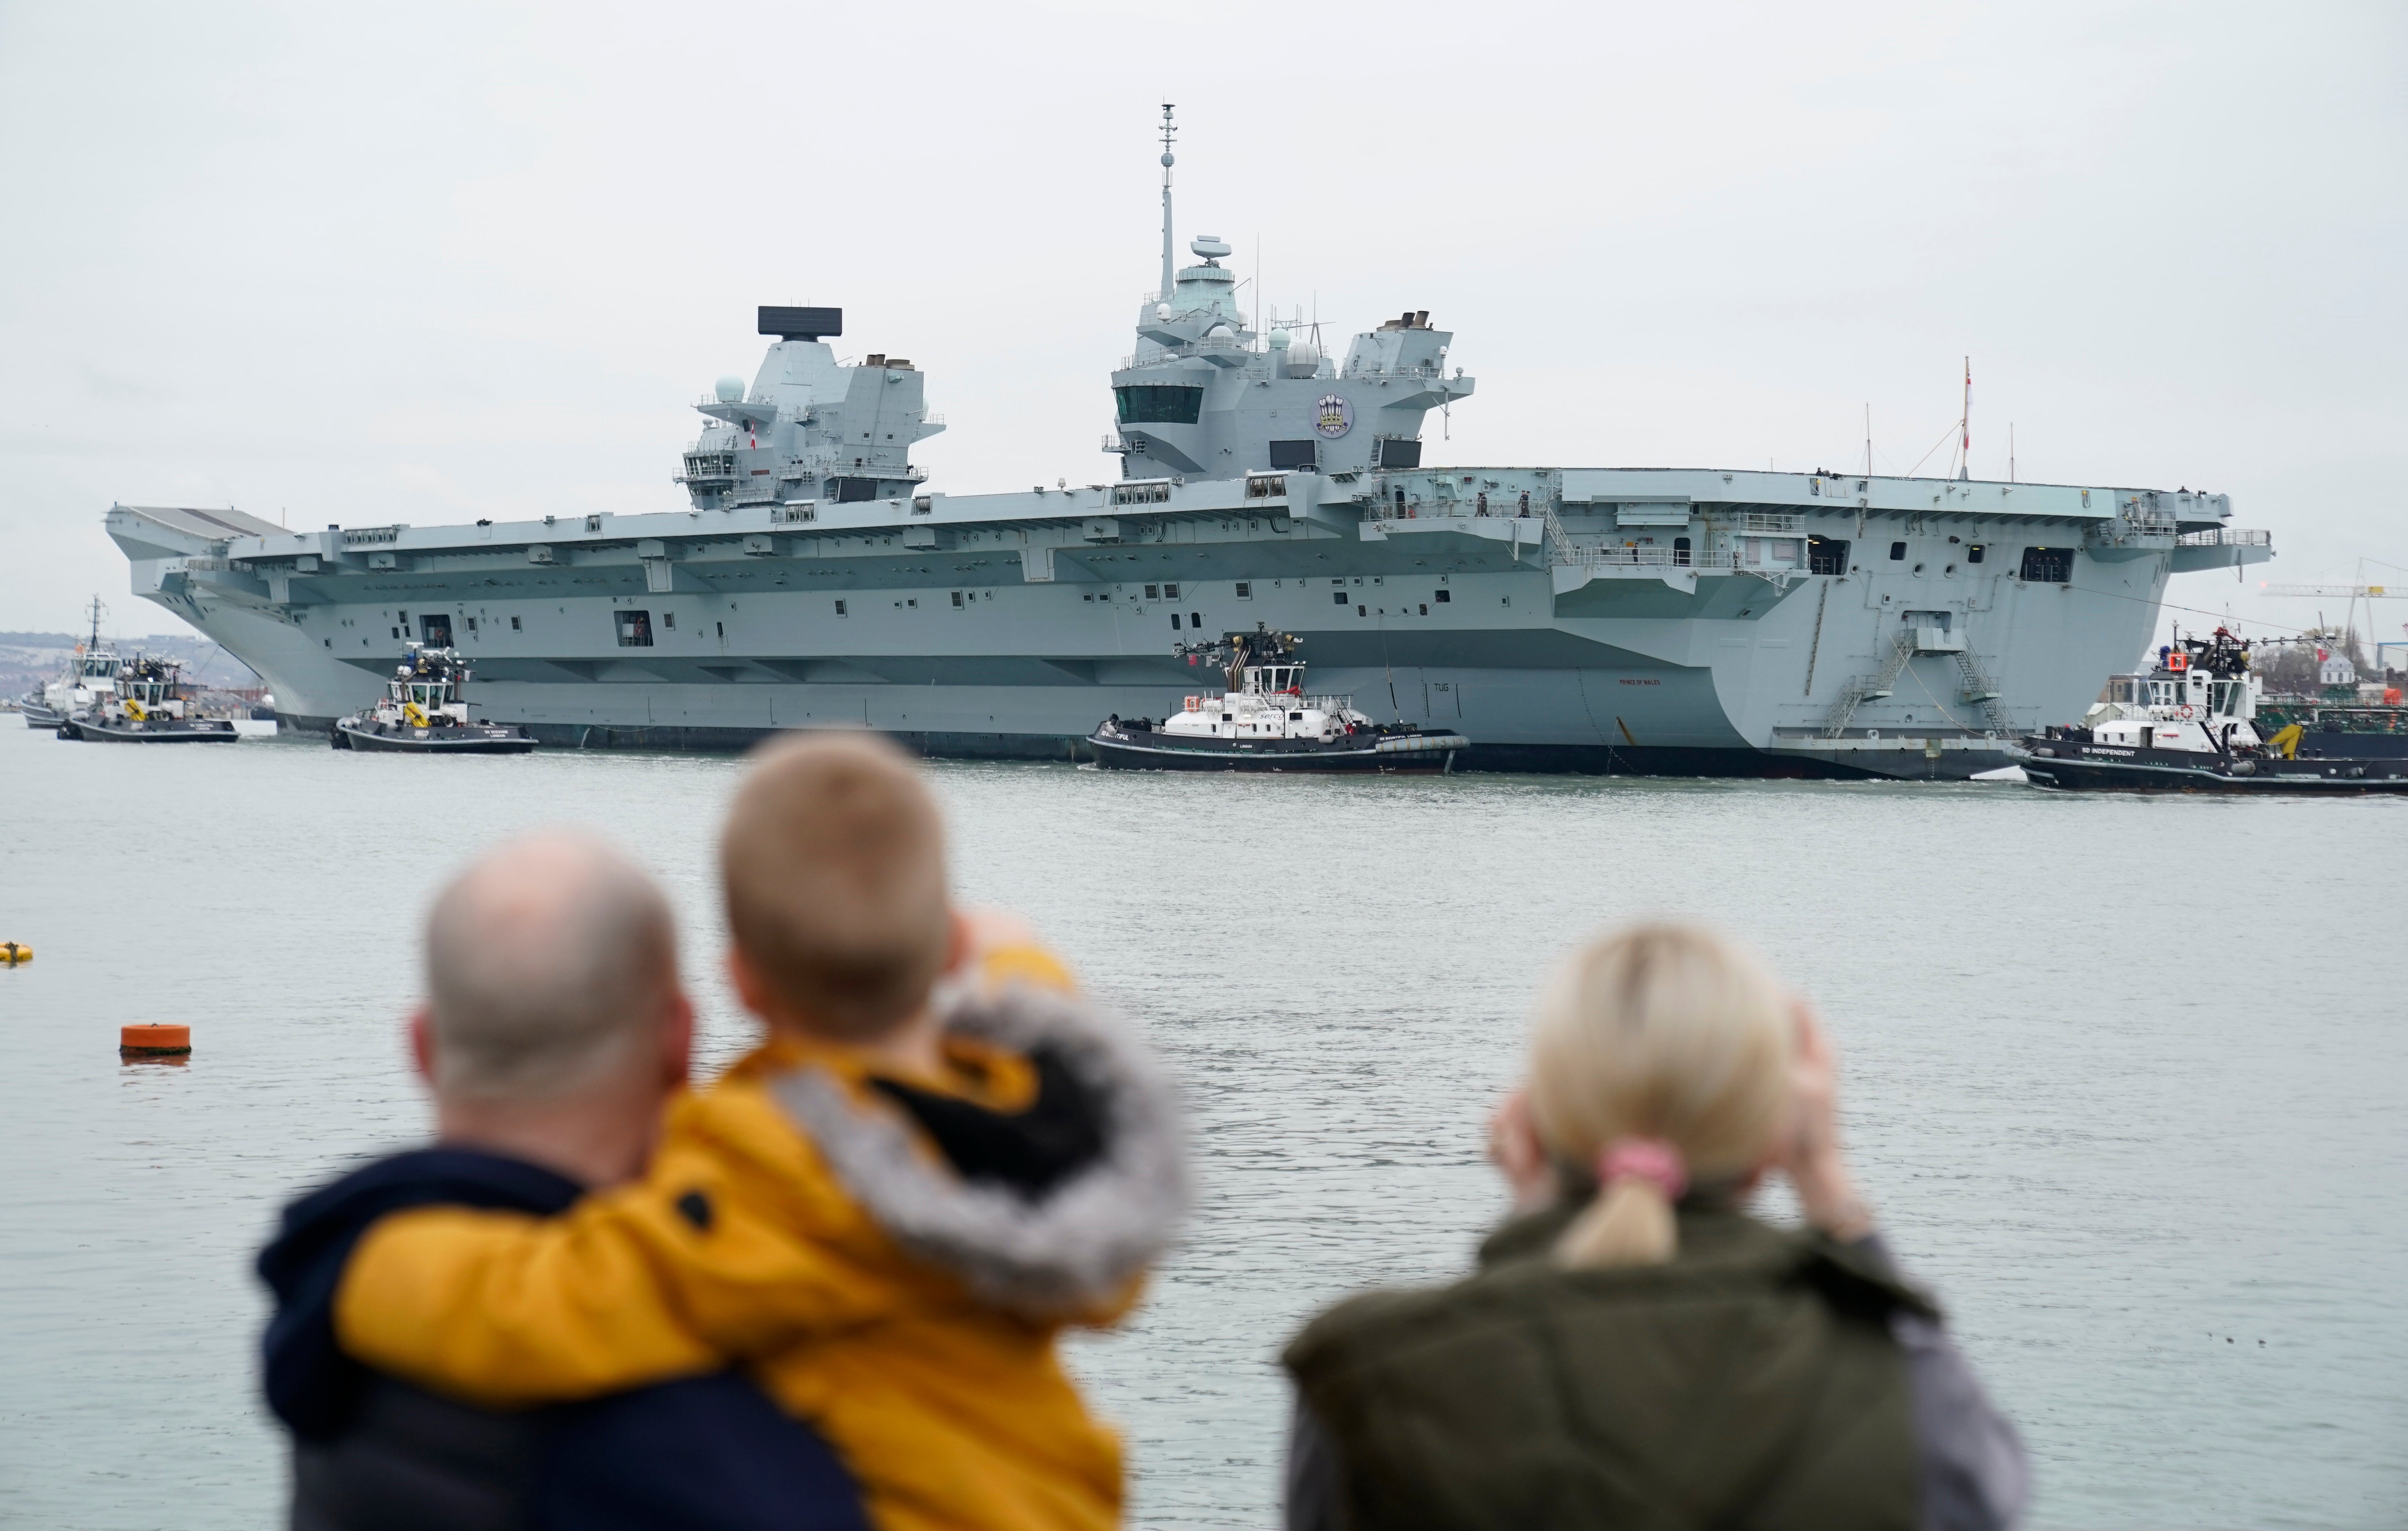 A Royal Navy aircraft carrier returns to her home port of Portsmouth